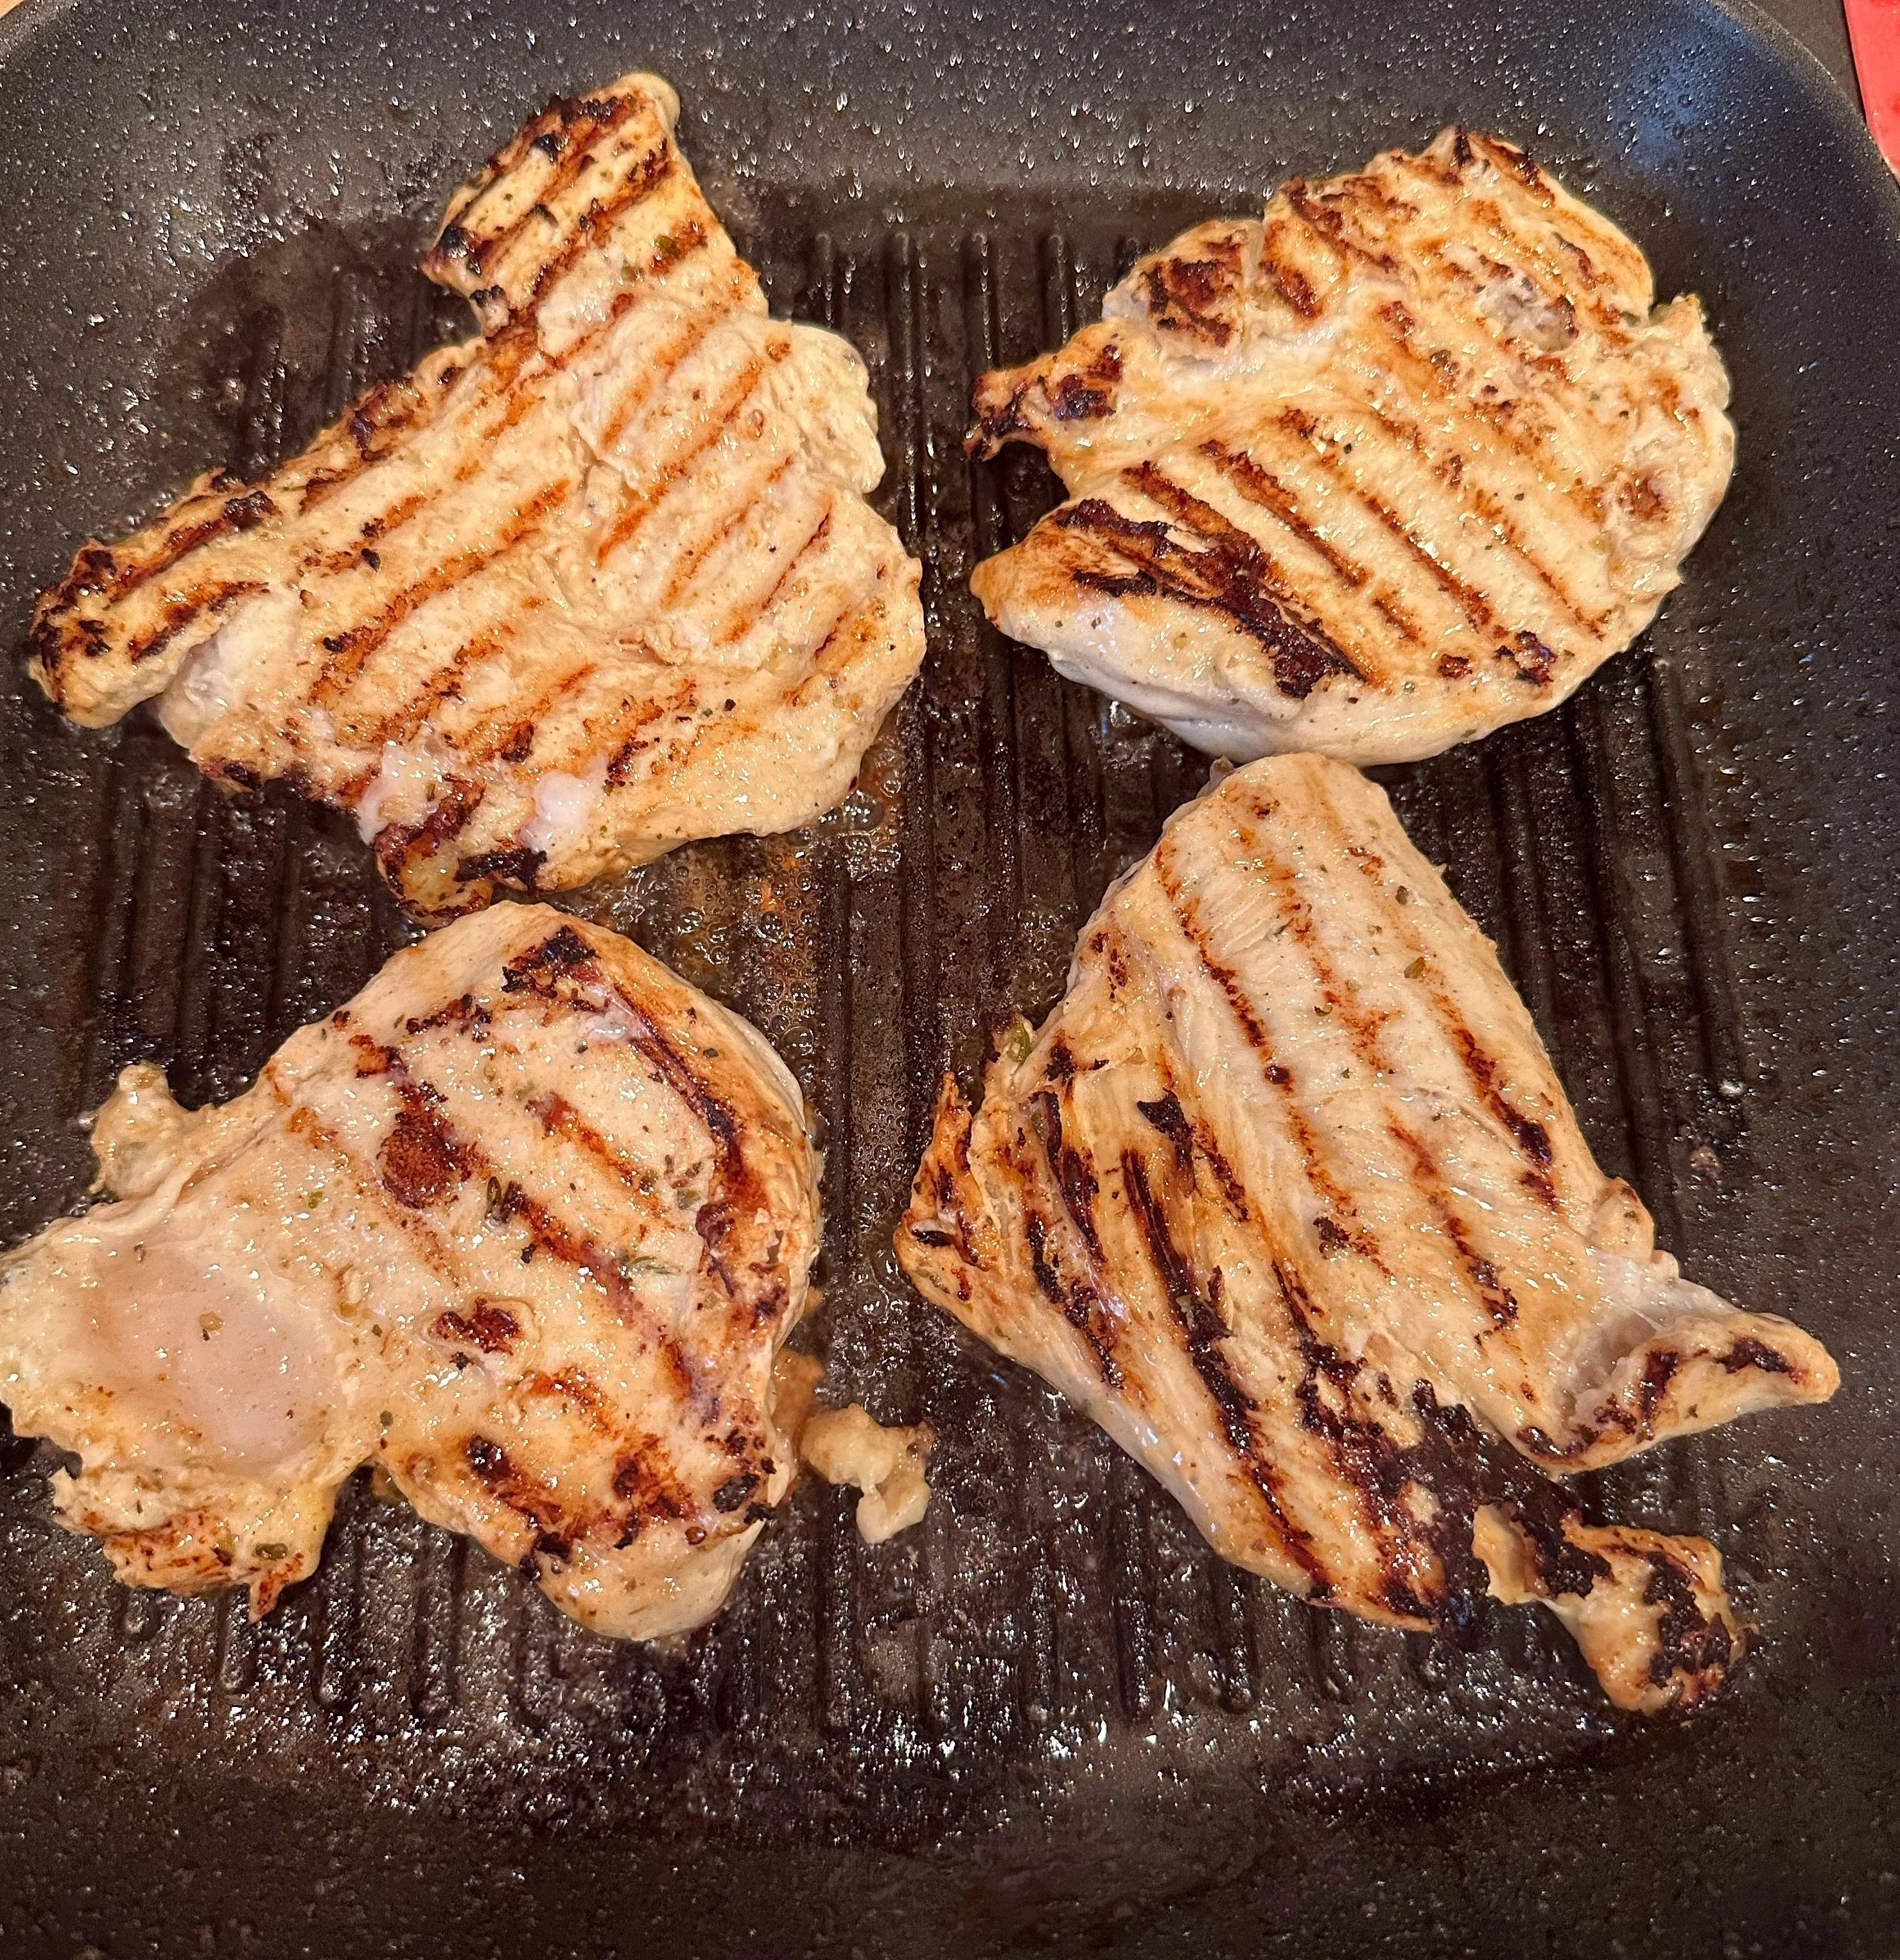 Chicken grilled on one side and cooking on the other.